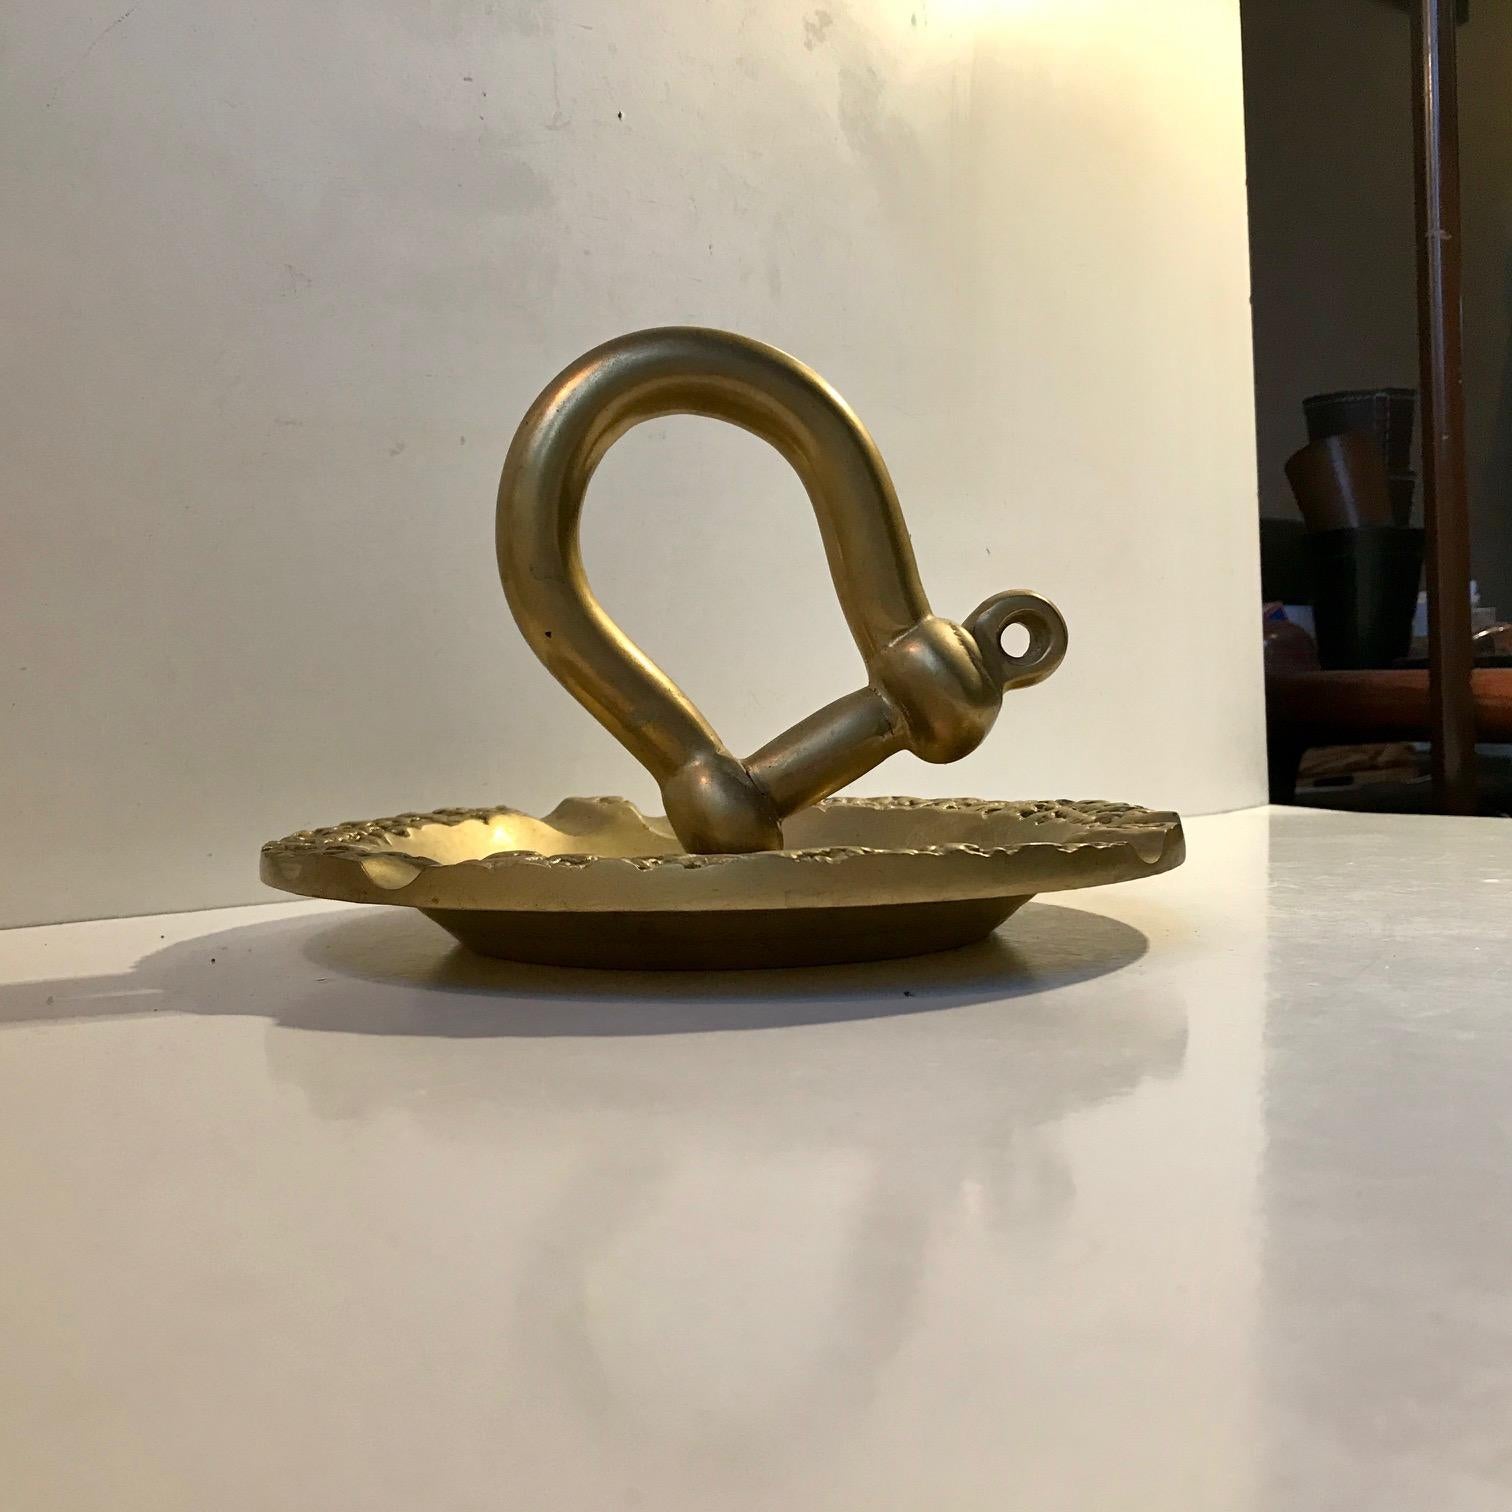 Unusual cigar ashtray in bronze. Its mounted with a large maritime shackle also in bronze. It was made in Scandinavia during the 1950s probably by Nordisk Malm.